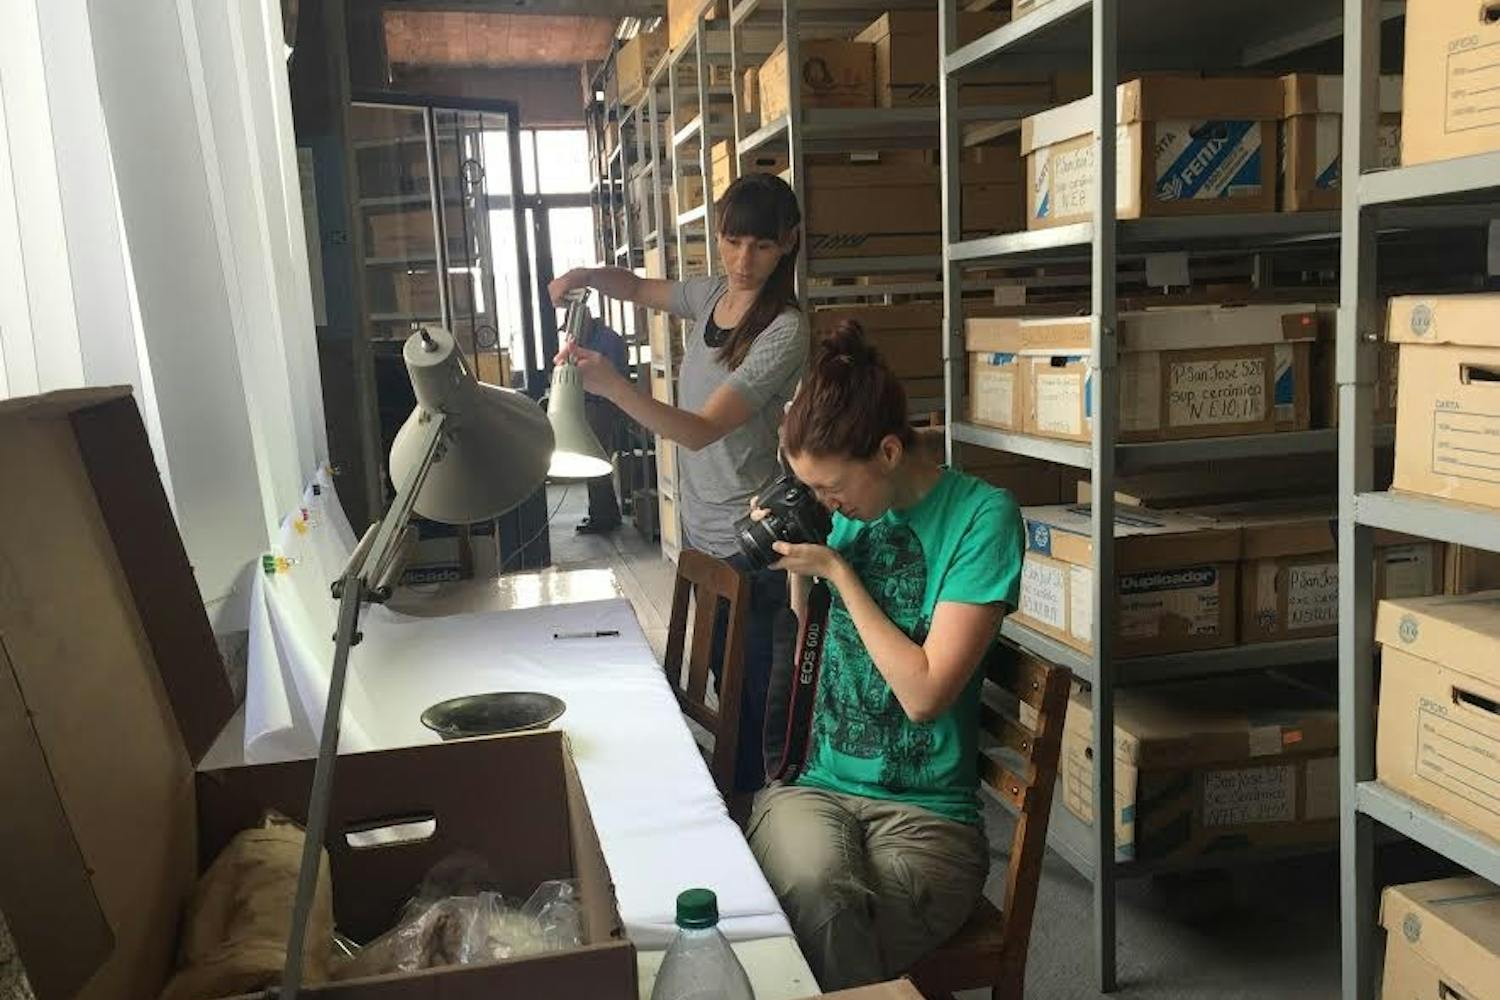 Katie Rush and Lisa Gallagher, two museum studies students at ASU, work in a lab together.